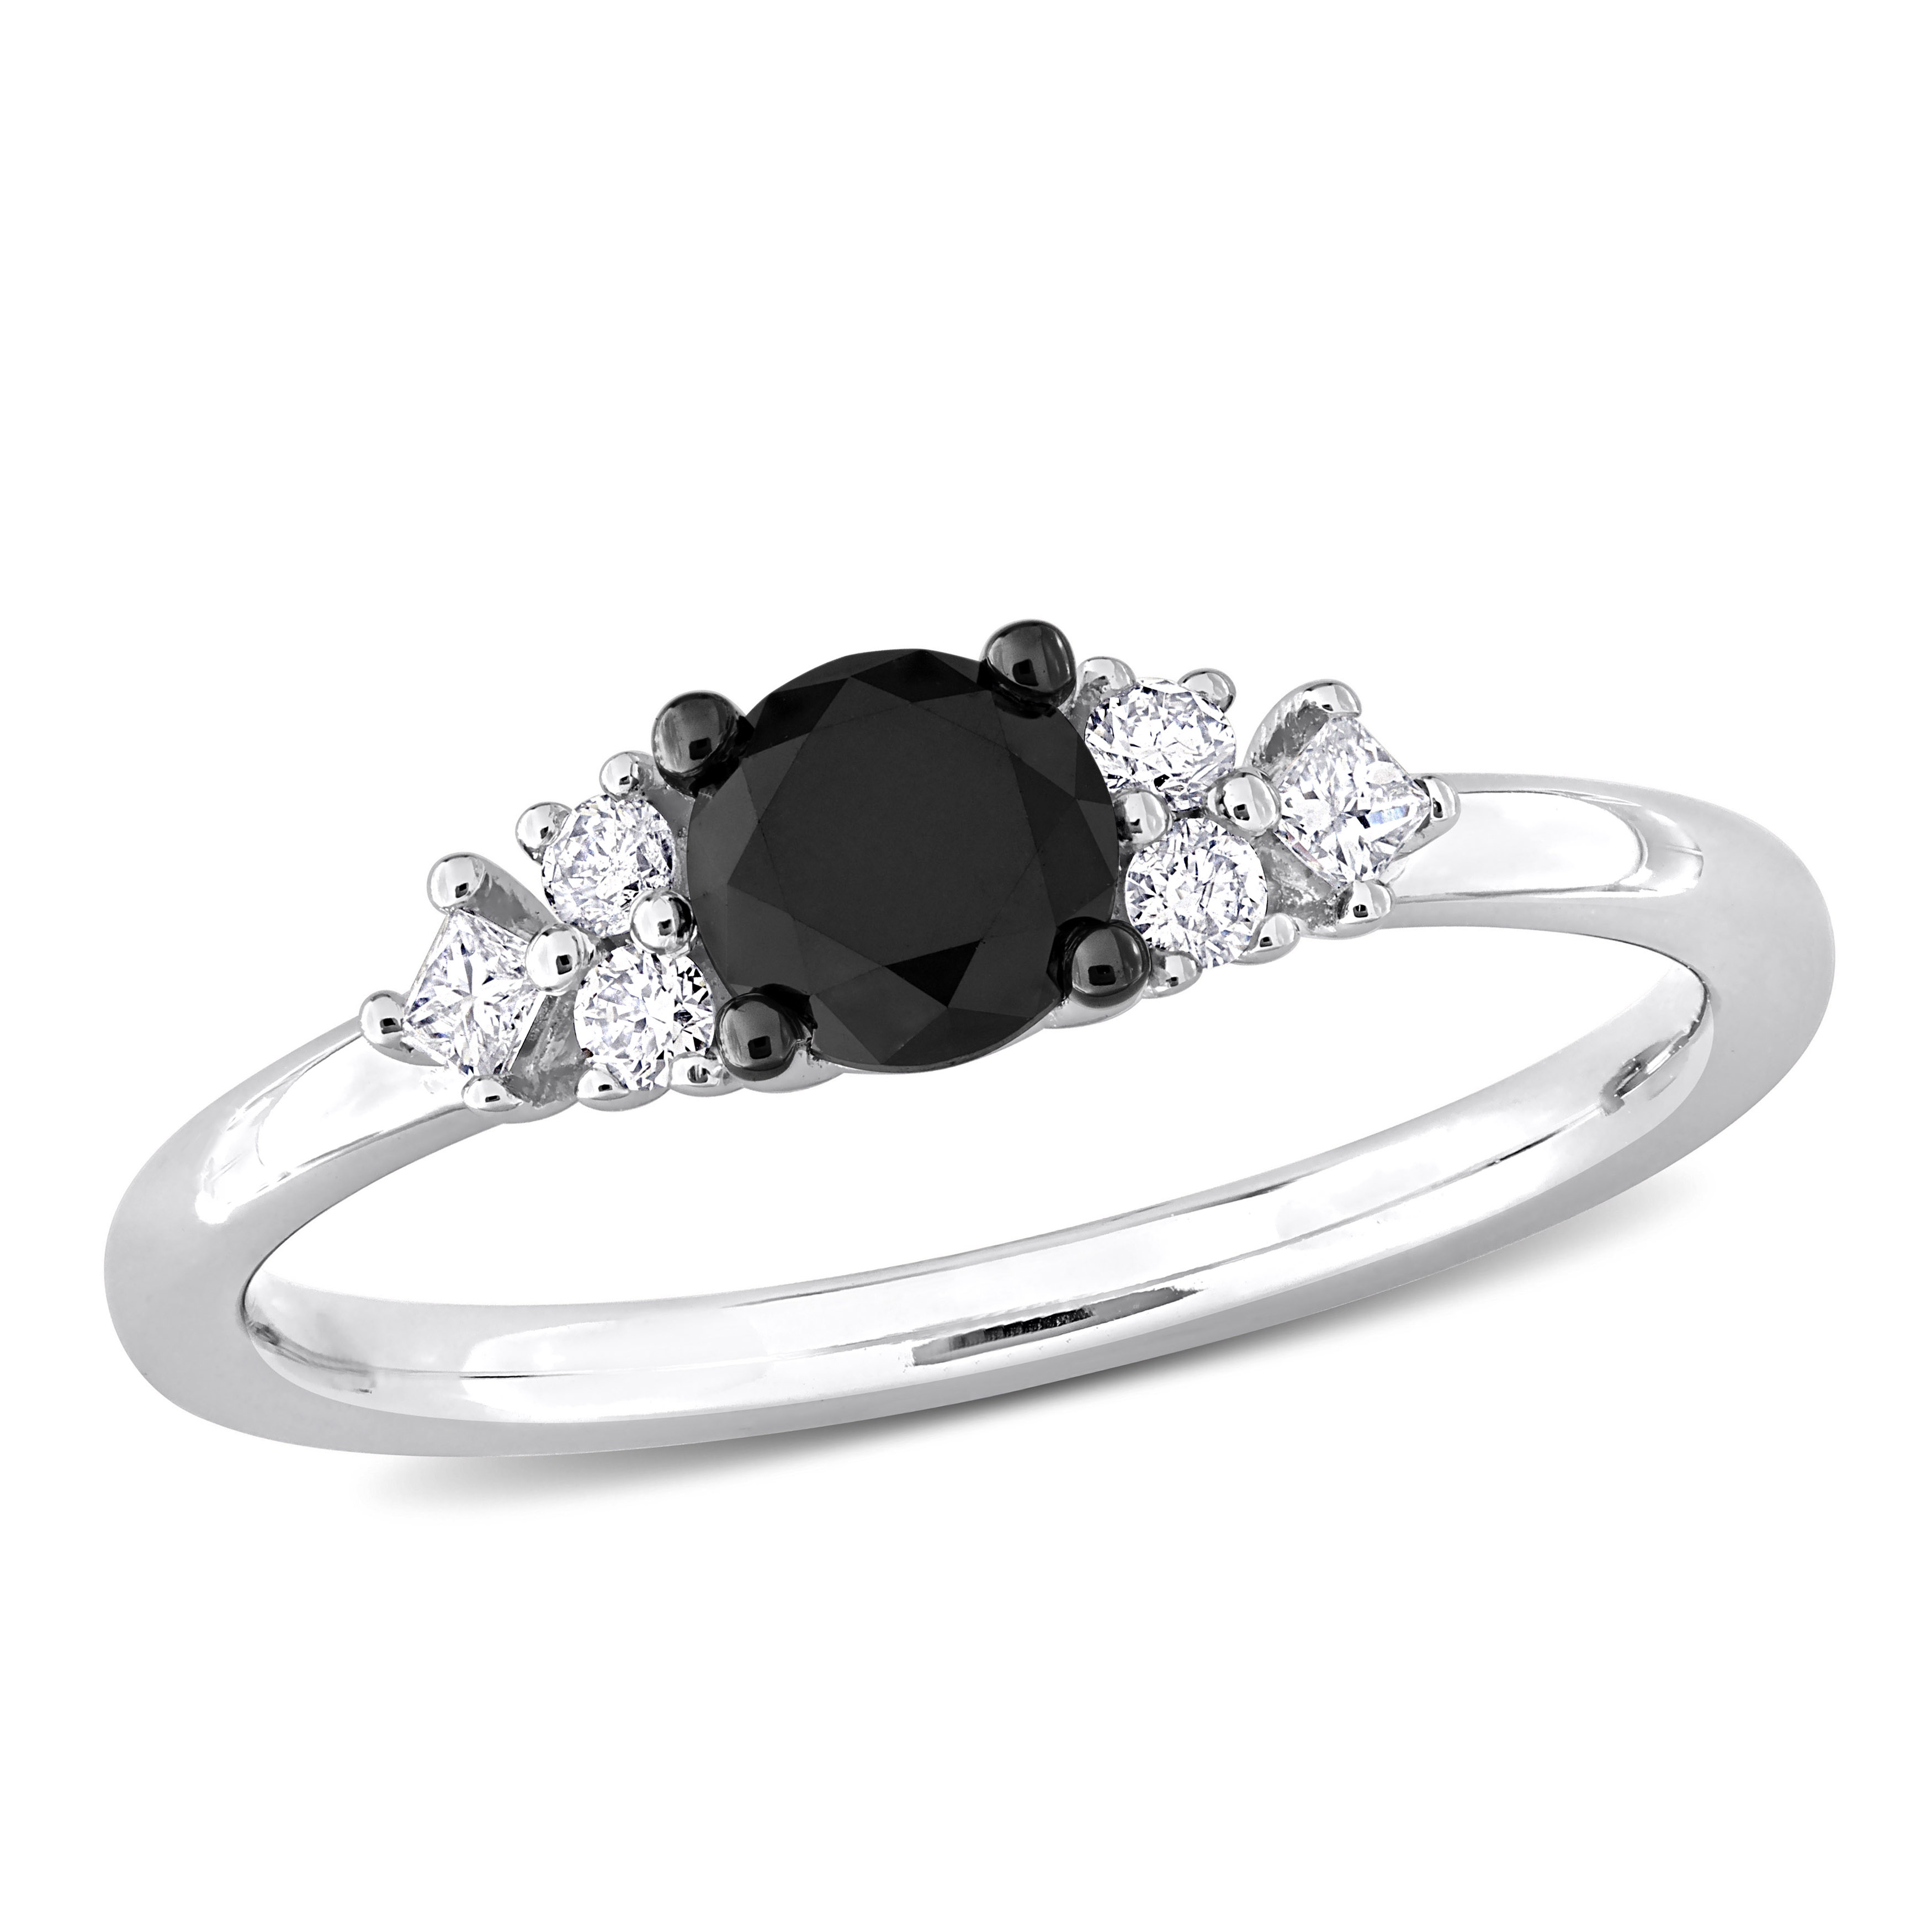 5/8 CT TDW Black and White Princess and Round-Cut Diamond Engagement Ring in 14k White Gold